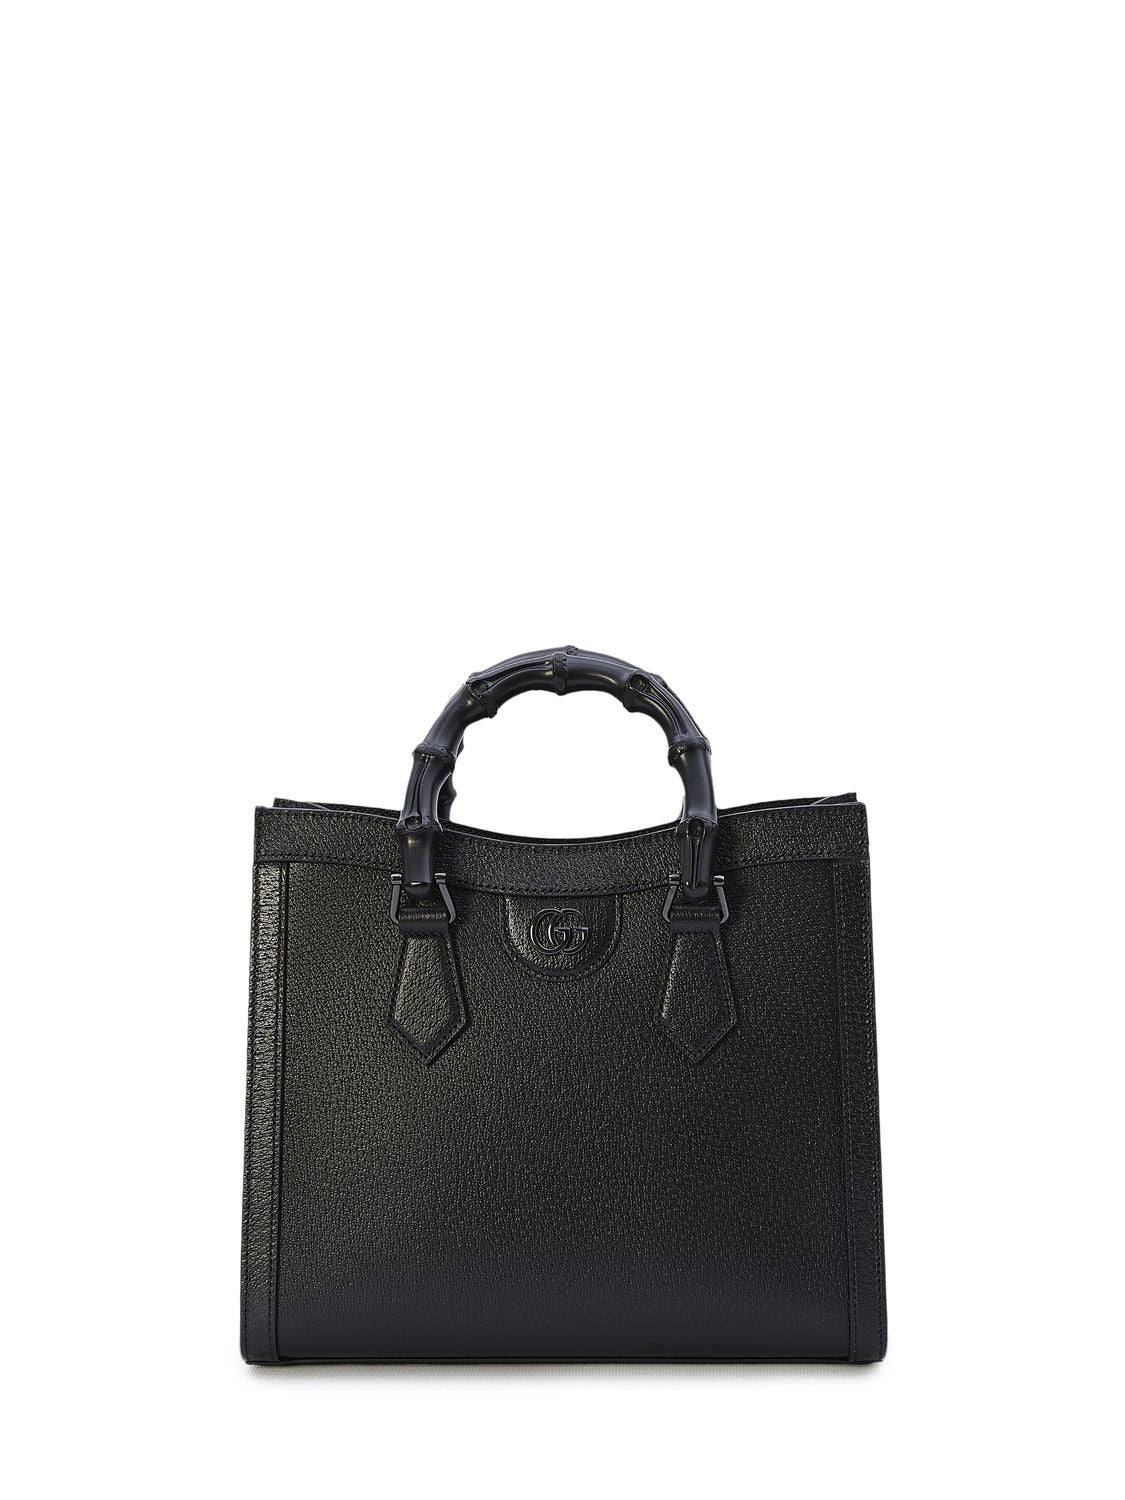 GUCCI Diana Small Black Pebbled Leather Tote with Bamboo Handles and Convertible Straps